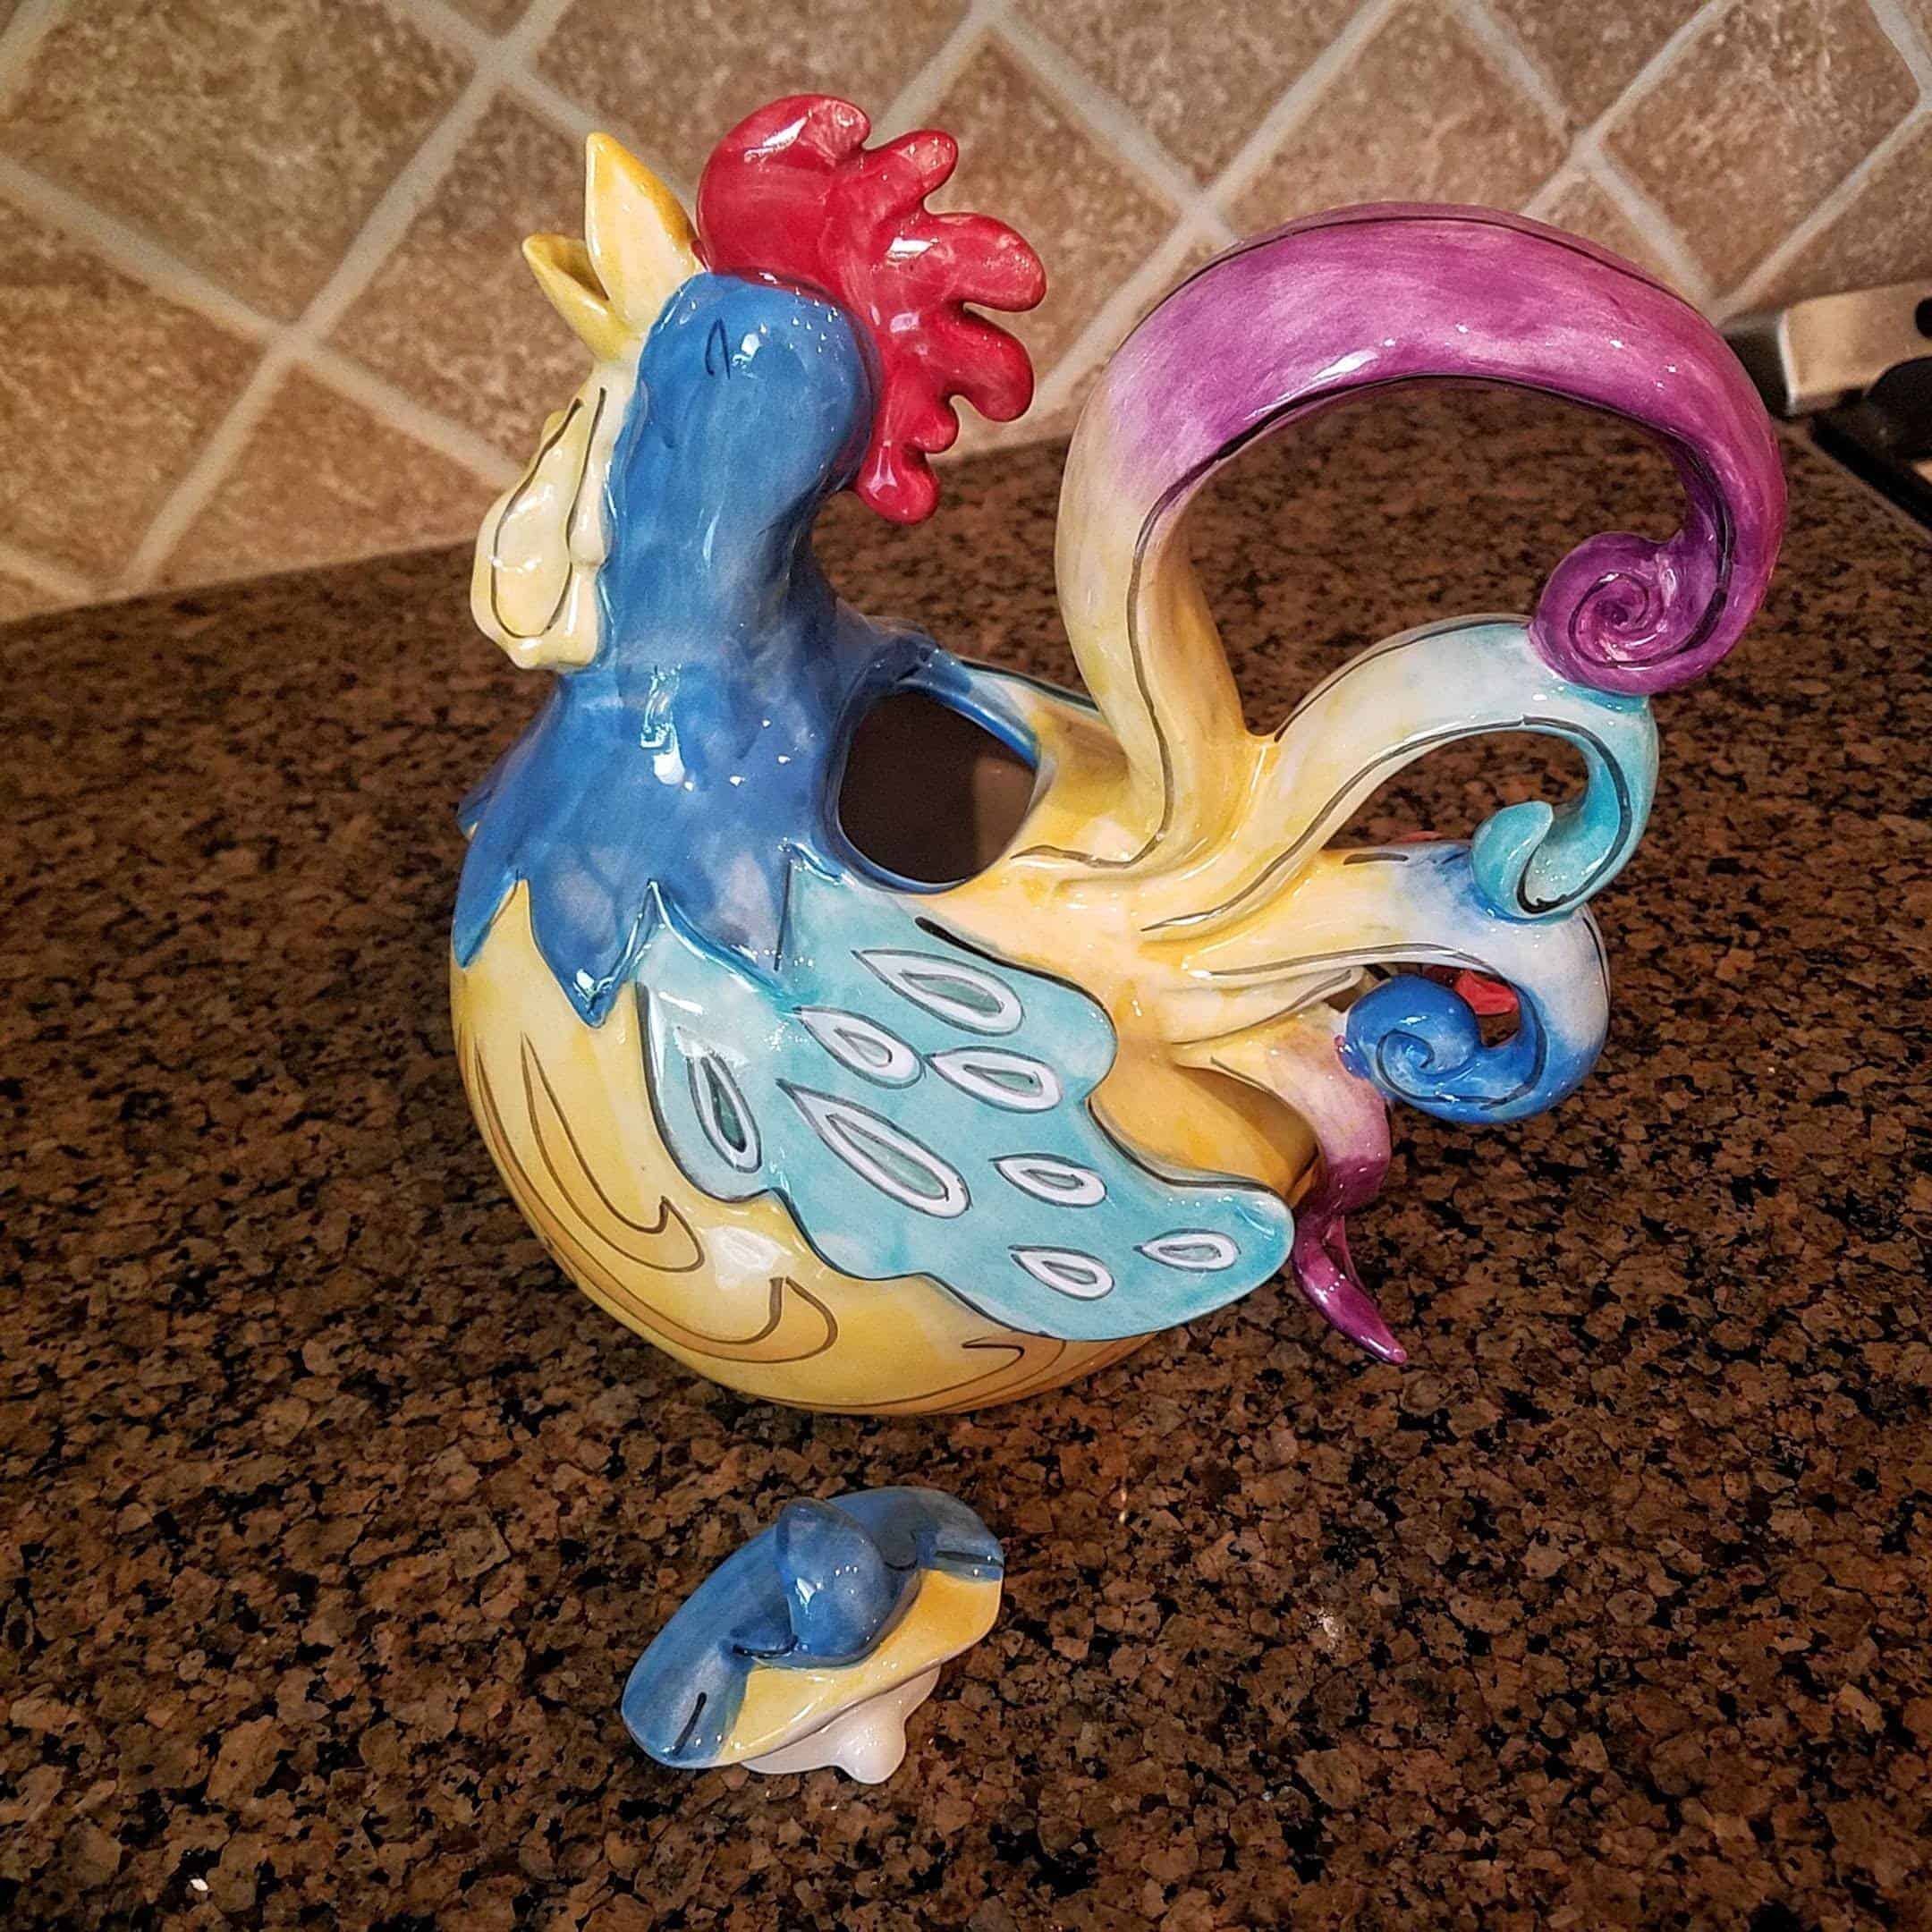 This Gabby Glee Chicken Rooster Teapot is made with love by Premier Homegoods! Shop more unique gift ideas today with Spots Initiatives, the best way to support creators.